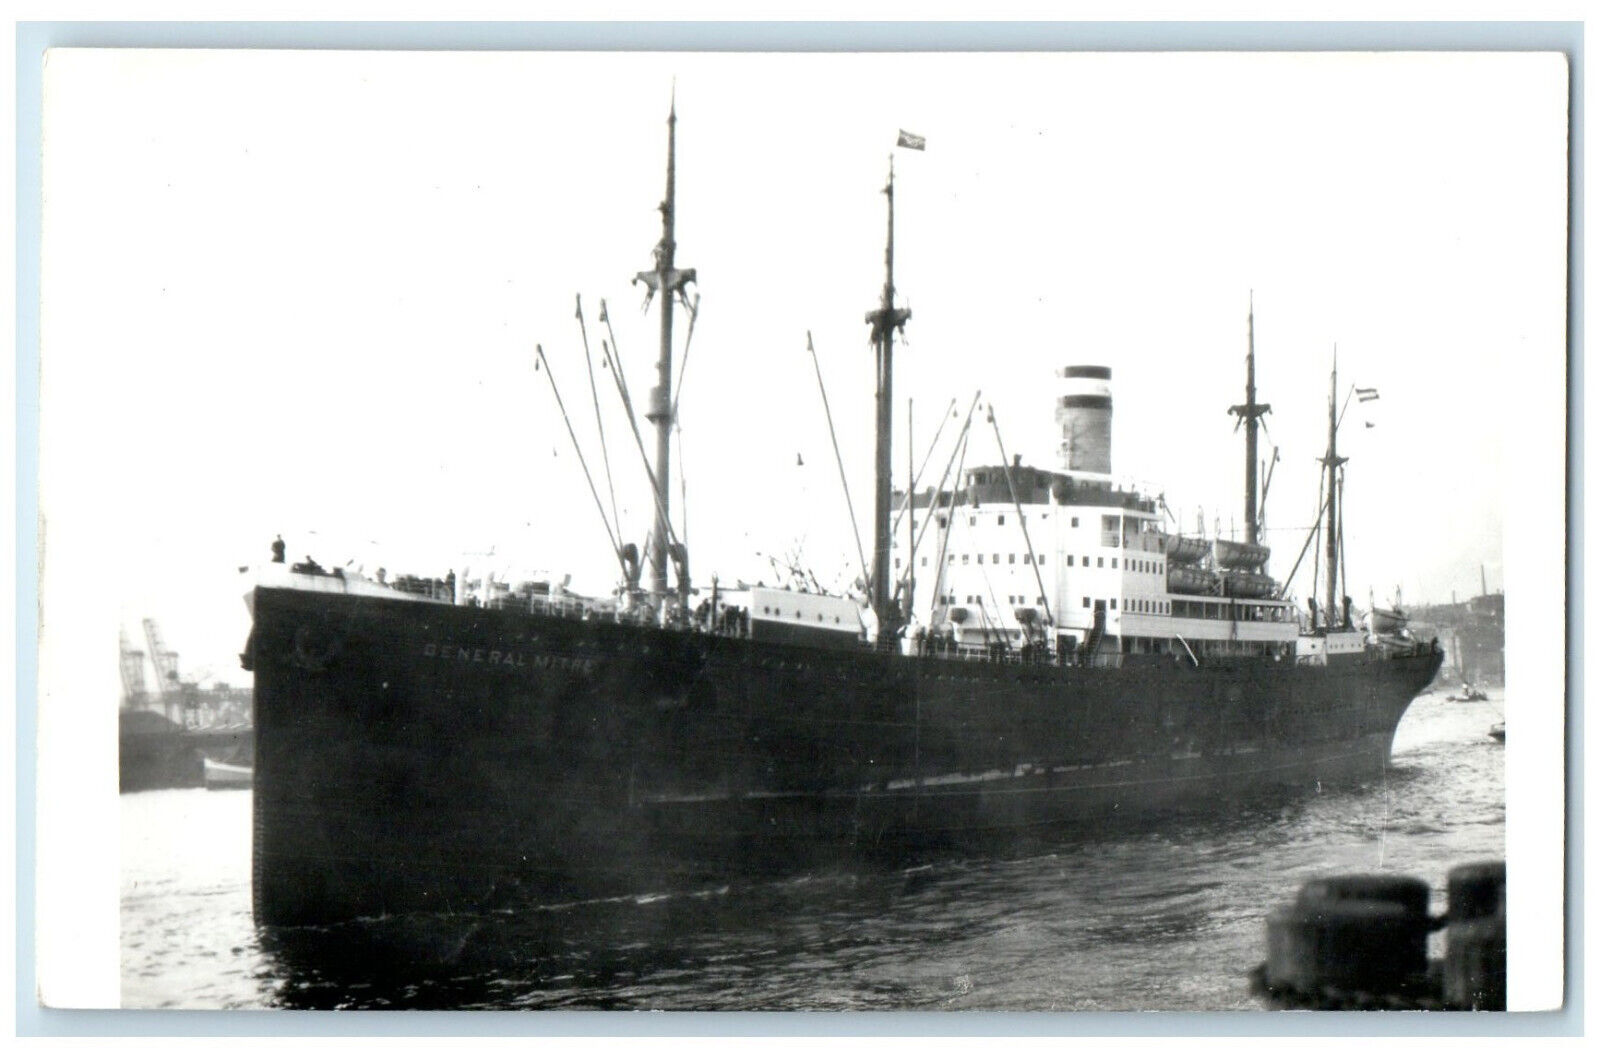 RPPC Photo Postcard View of General Mitre Steamship 1920 Unposted Antique